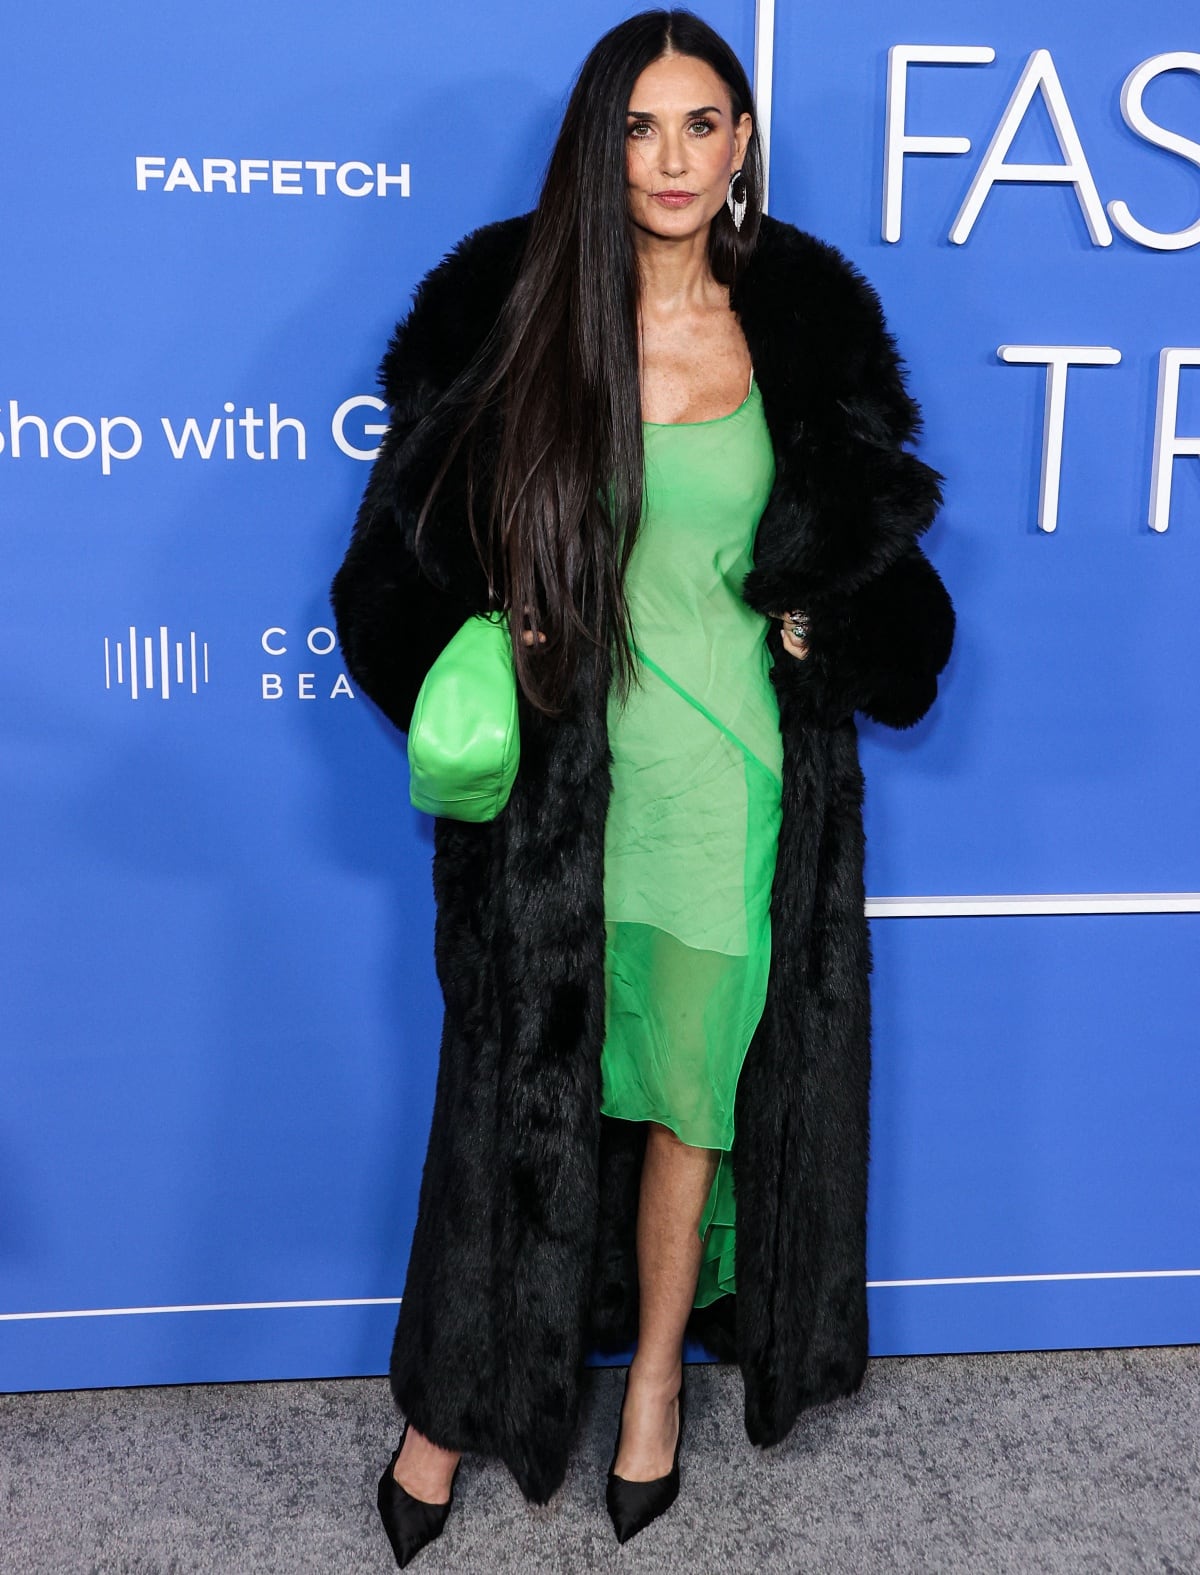 Demi Moore looking stunning in a lime green Givenchy Fall/Winter 2023 dress with a black fur coat and Le Silla heels